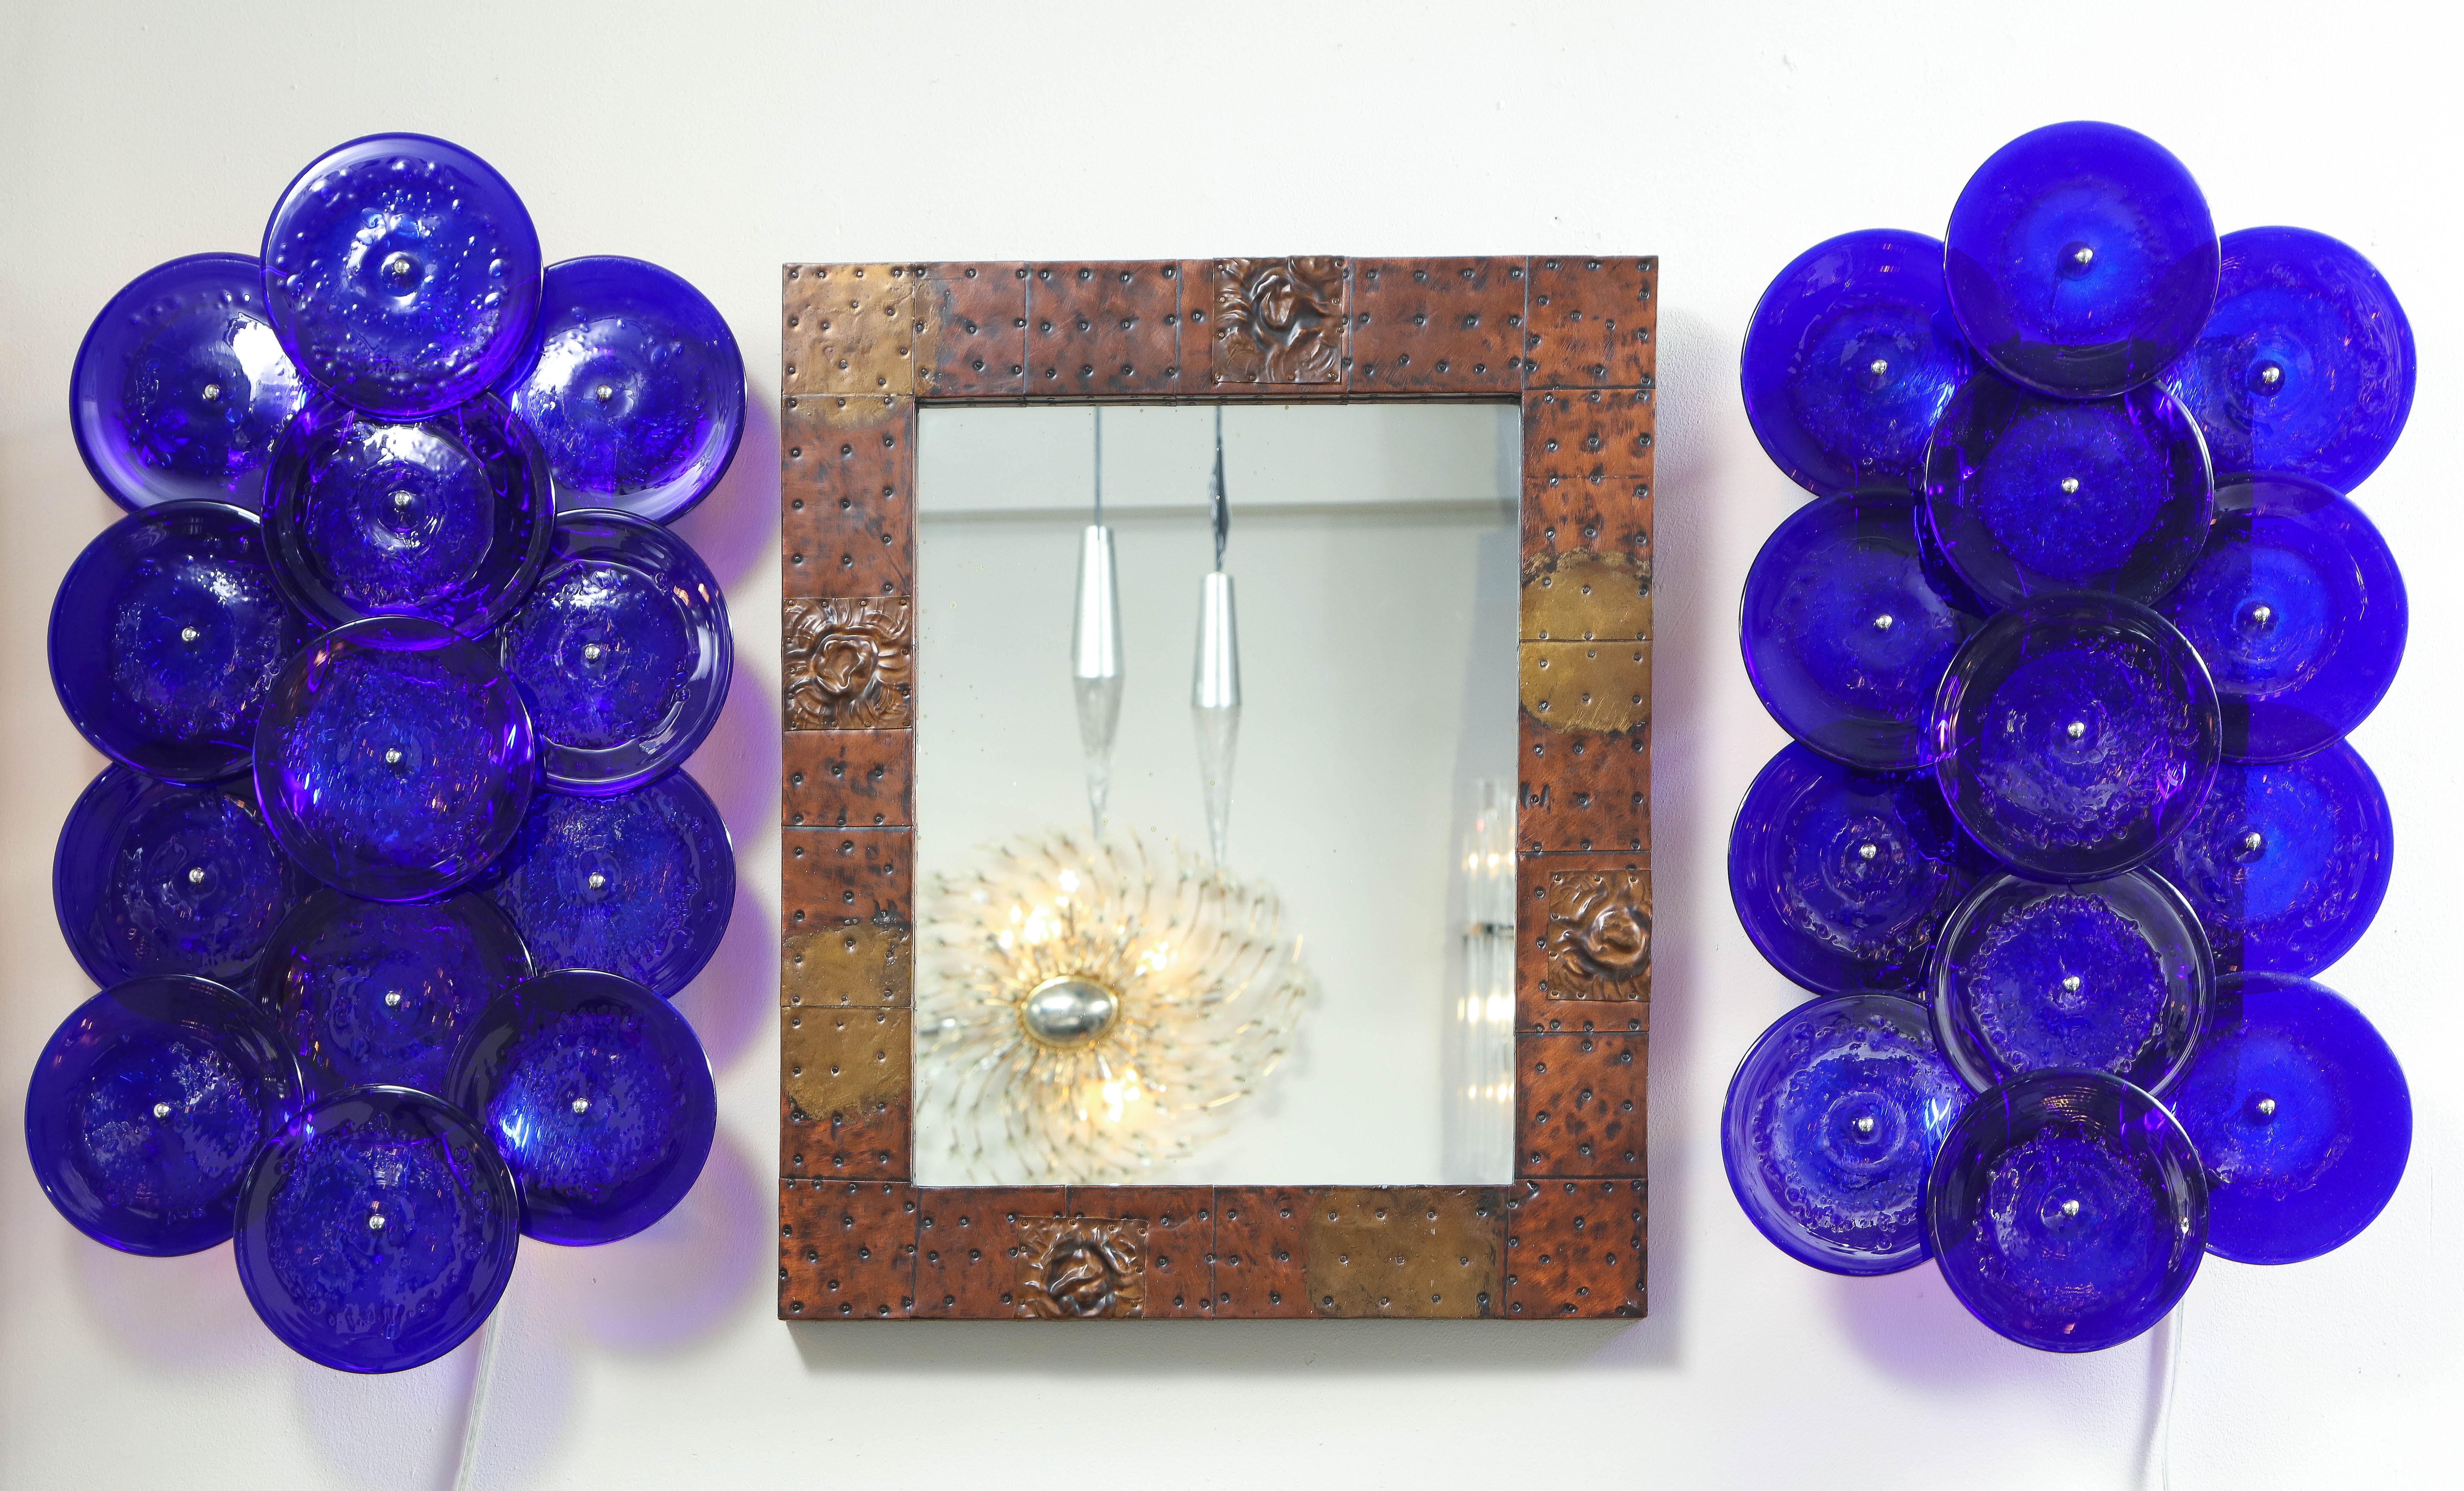 One of a kind pair of sconces seen in images available for immediate purchase. The pair is in pristine condition and has cobalt blue glass discs which were made in custom color. Custom order is also available in different glass colors, finishes, and